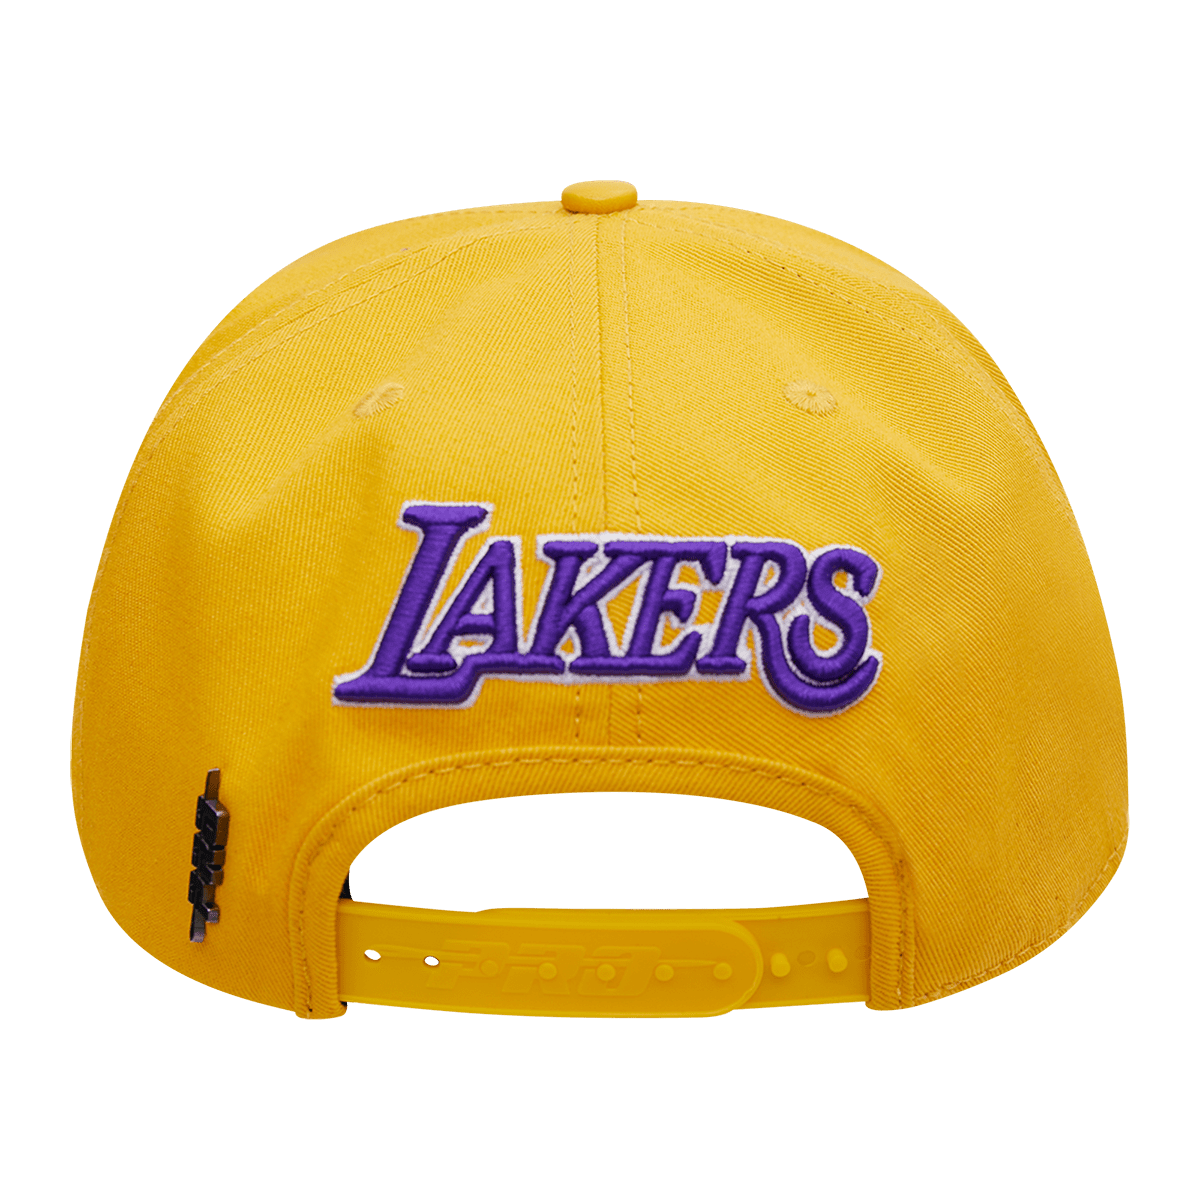 LOS ANGELES LAKERS LOGO SNAPBACK HAT OMBRE (BLUE/WHITE/PINK) – Pro Standard